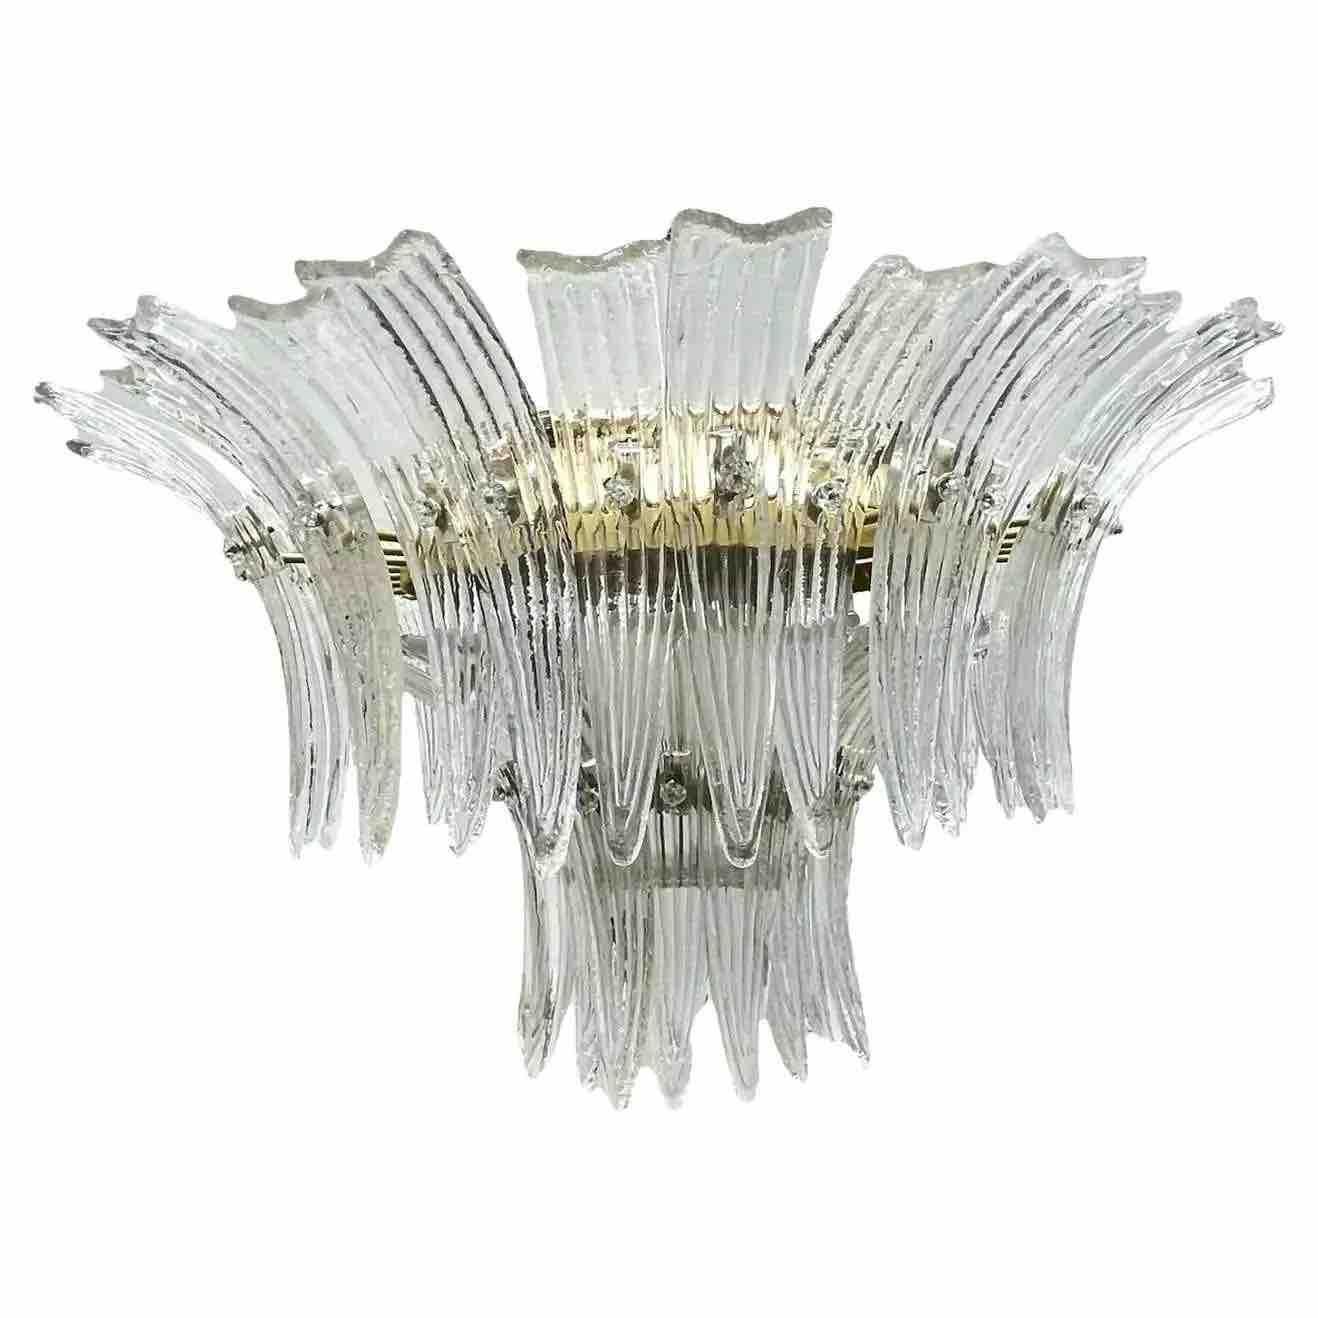 A pair of very elegant, vintage estate, midcentury Venetian Murano art glass chandelier features 2 round tiers of overlapping, large, curved, hand blown clear palm leaves frosted in the 